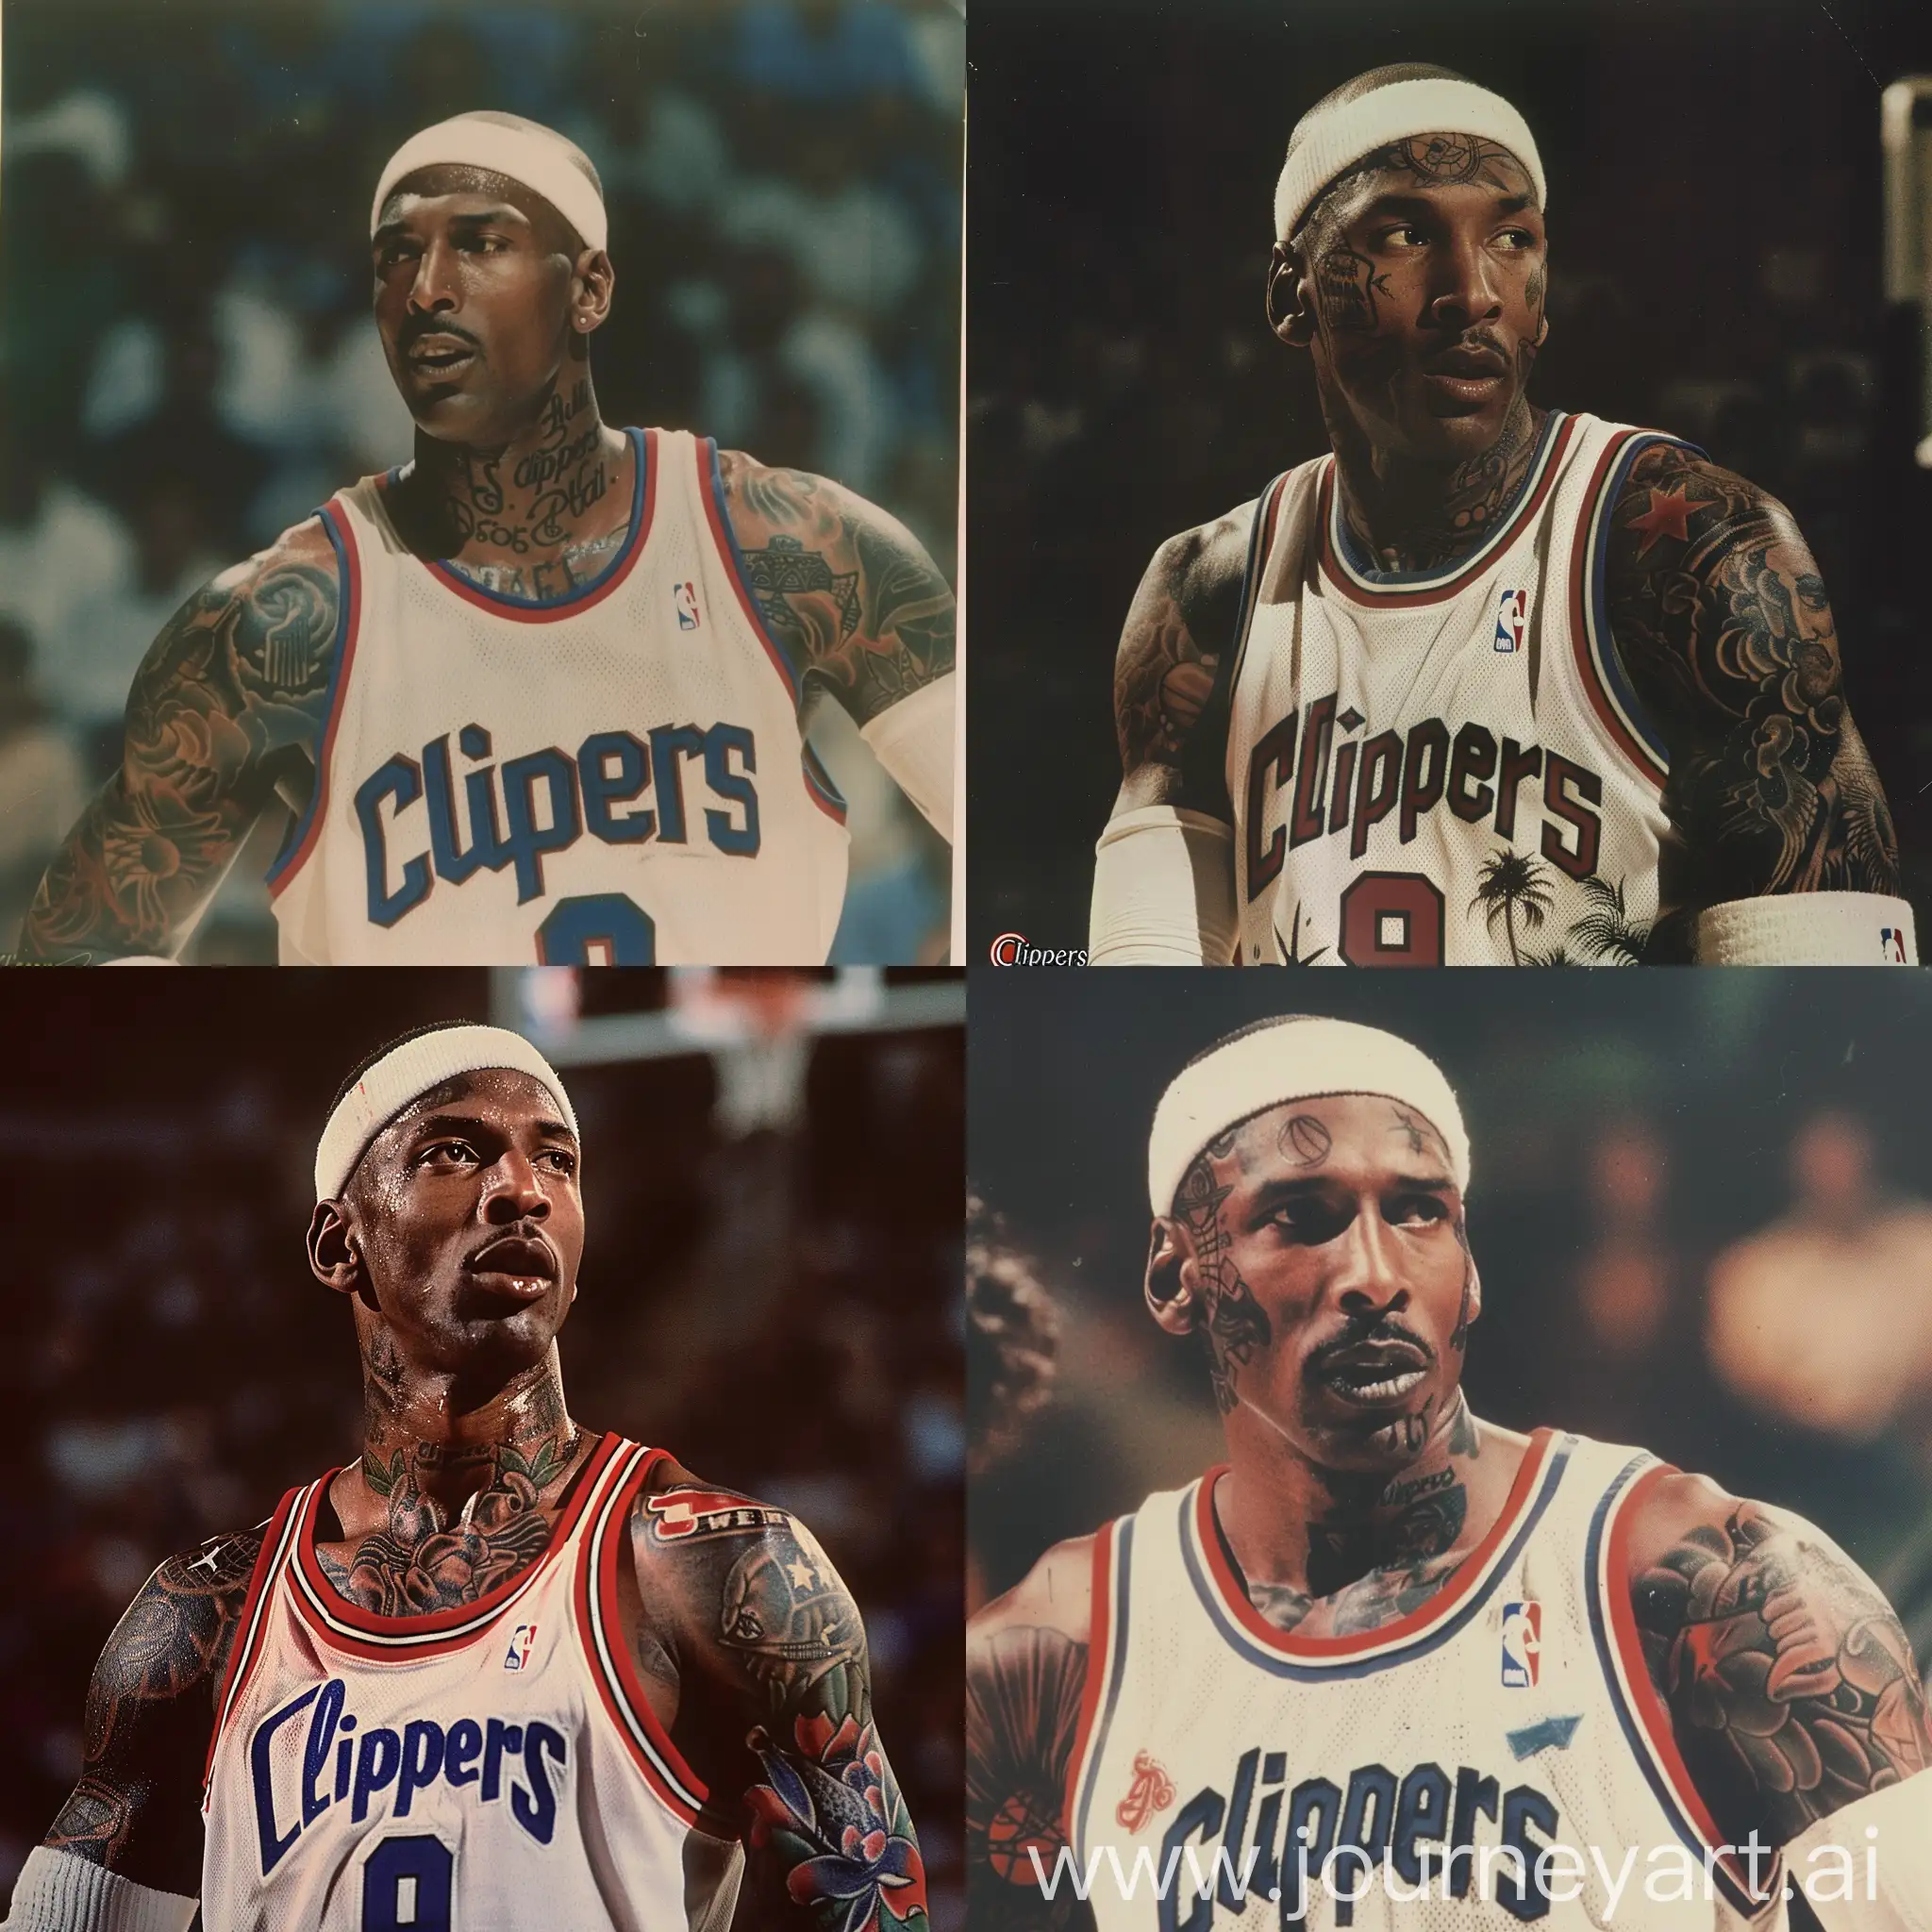 A 1980s Photograph Of Michael Jordan in a interview,With full Body Tattoos,wearing a Los angeles “Clippers” jersey with the number 9,And a White Headband,with a Sleeve